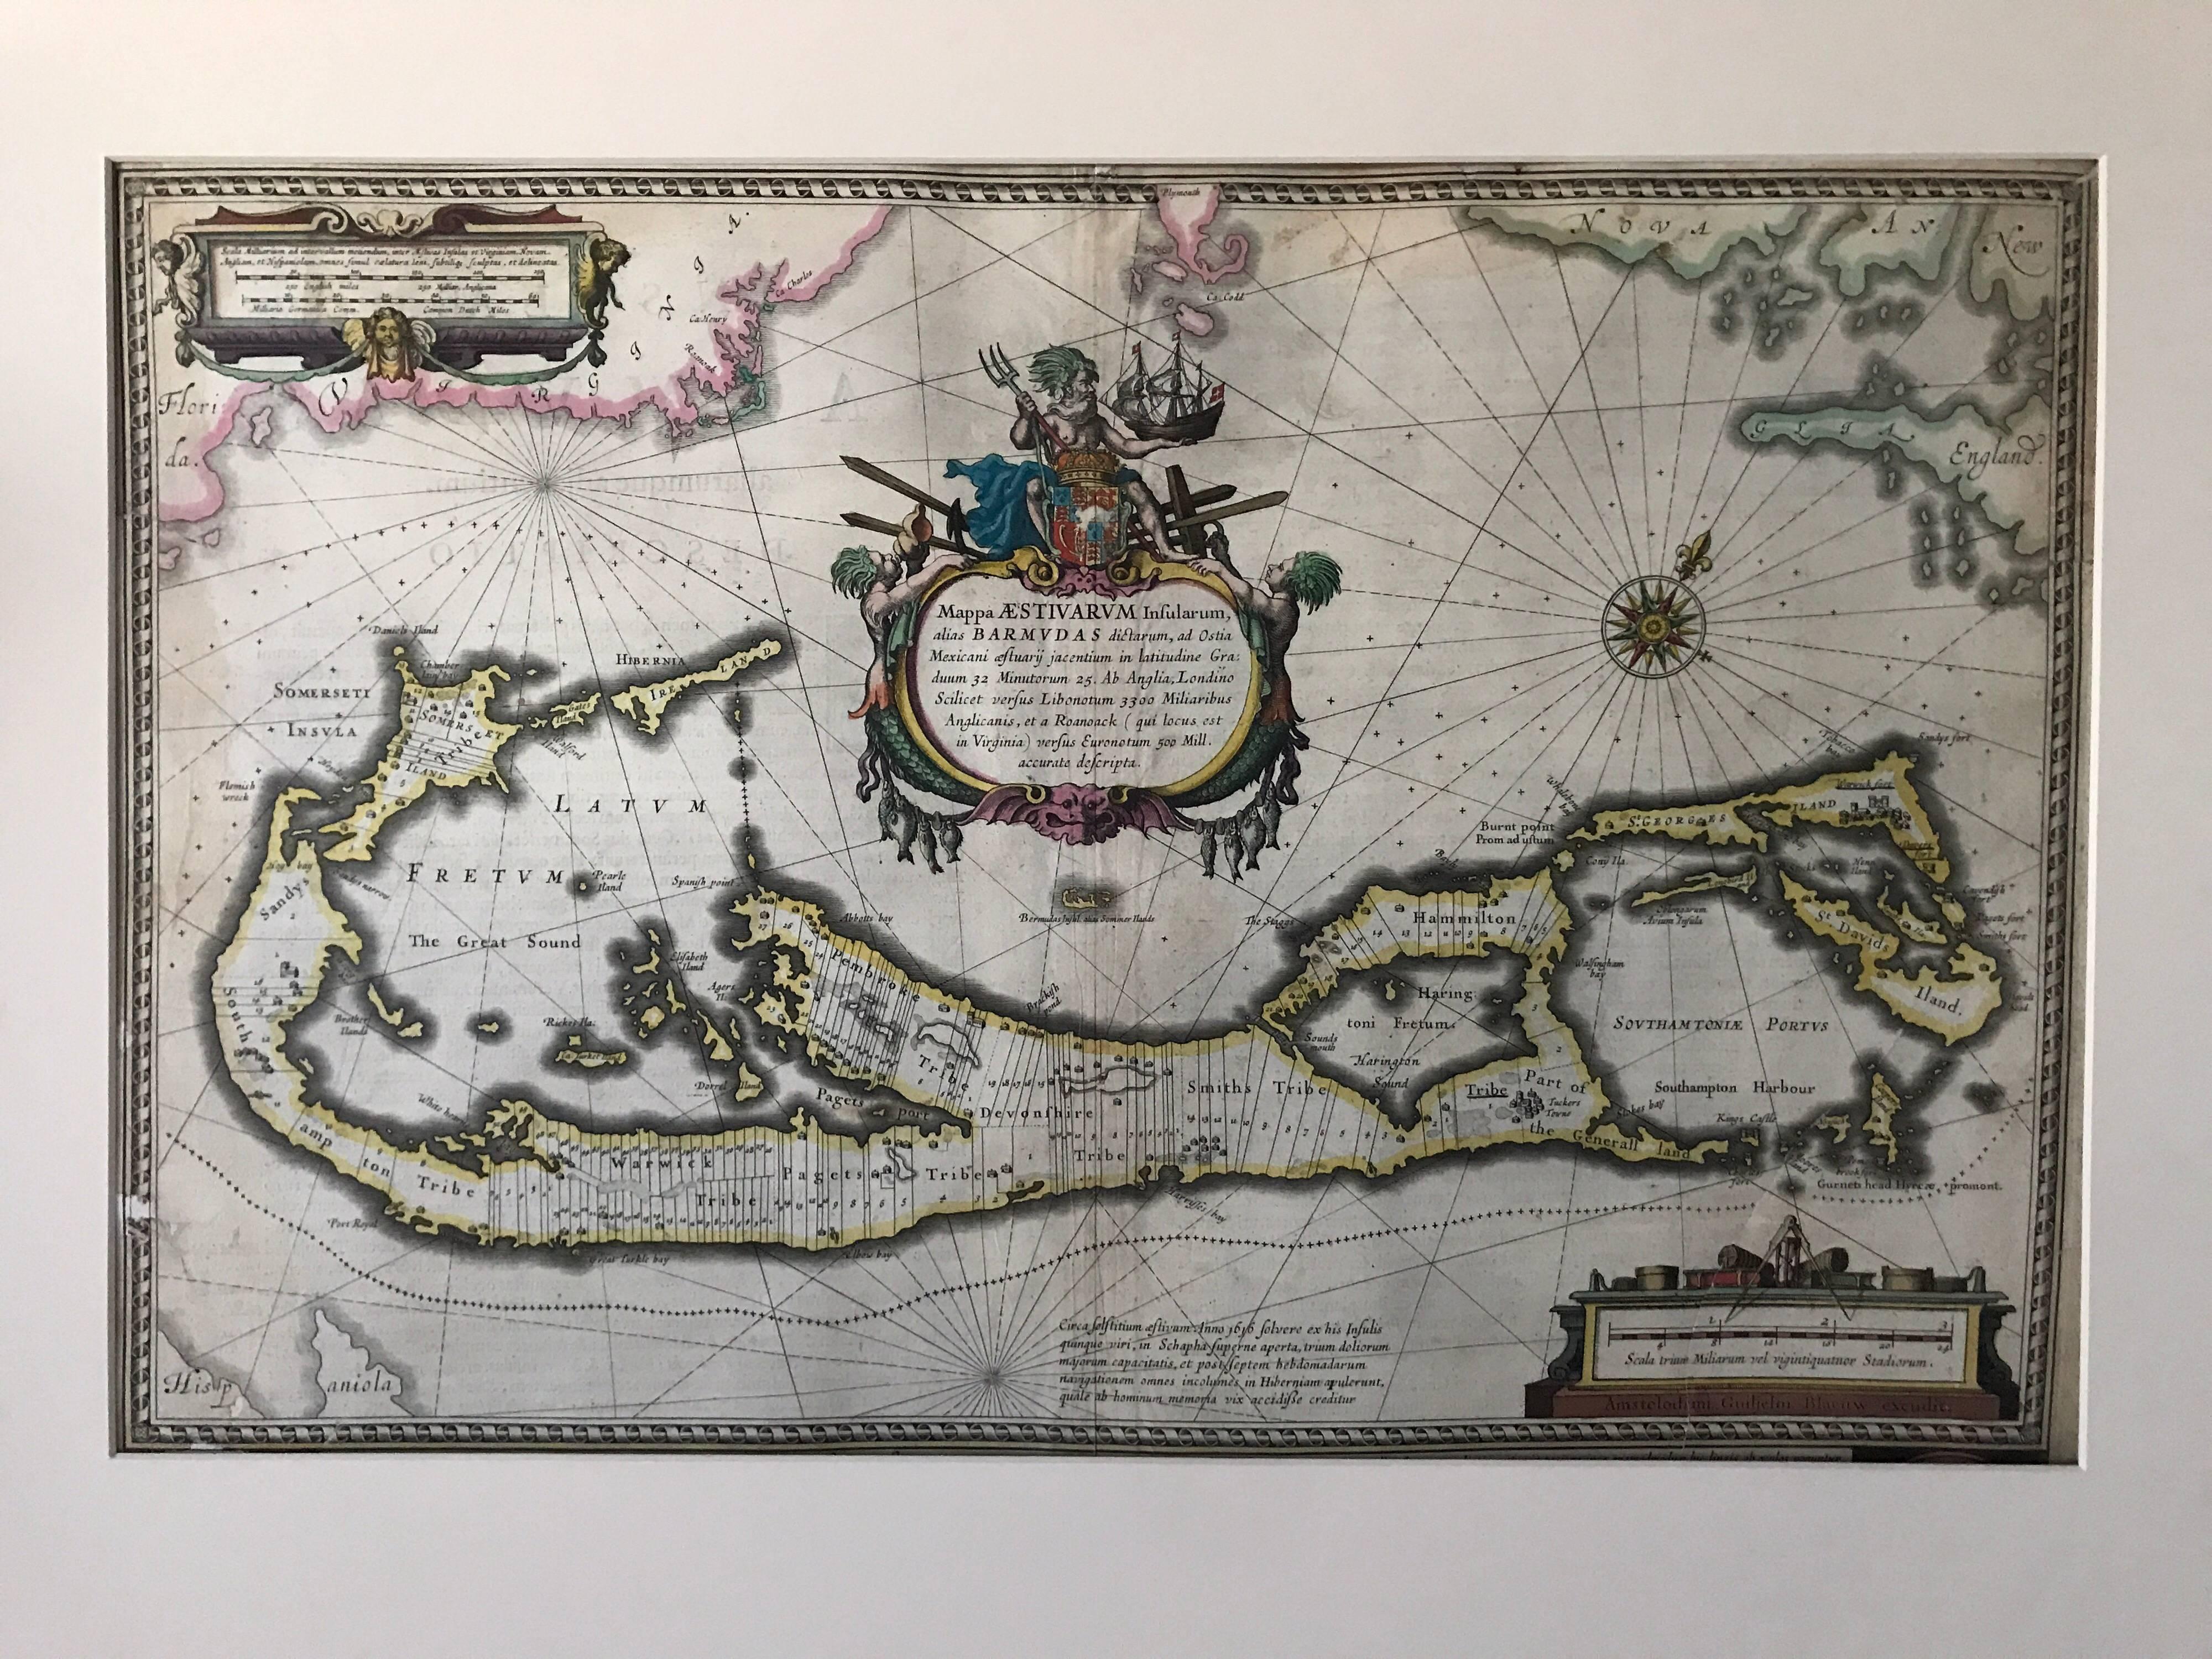 Map of Bermuda, Guiljelm Blaeuw, Mappa Aestivarum Insularum, alias Barmudas. Amsterdam, circa 1640.
Colored engraved map with large figurative cartouche and compass rose. Latin text on verso, describing the Bermuda Isalnds, the dimensions of the